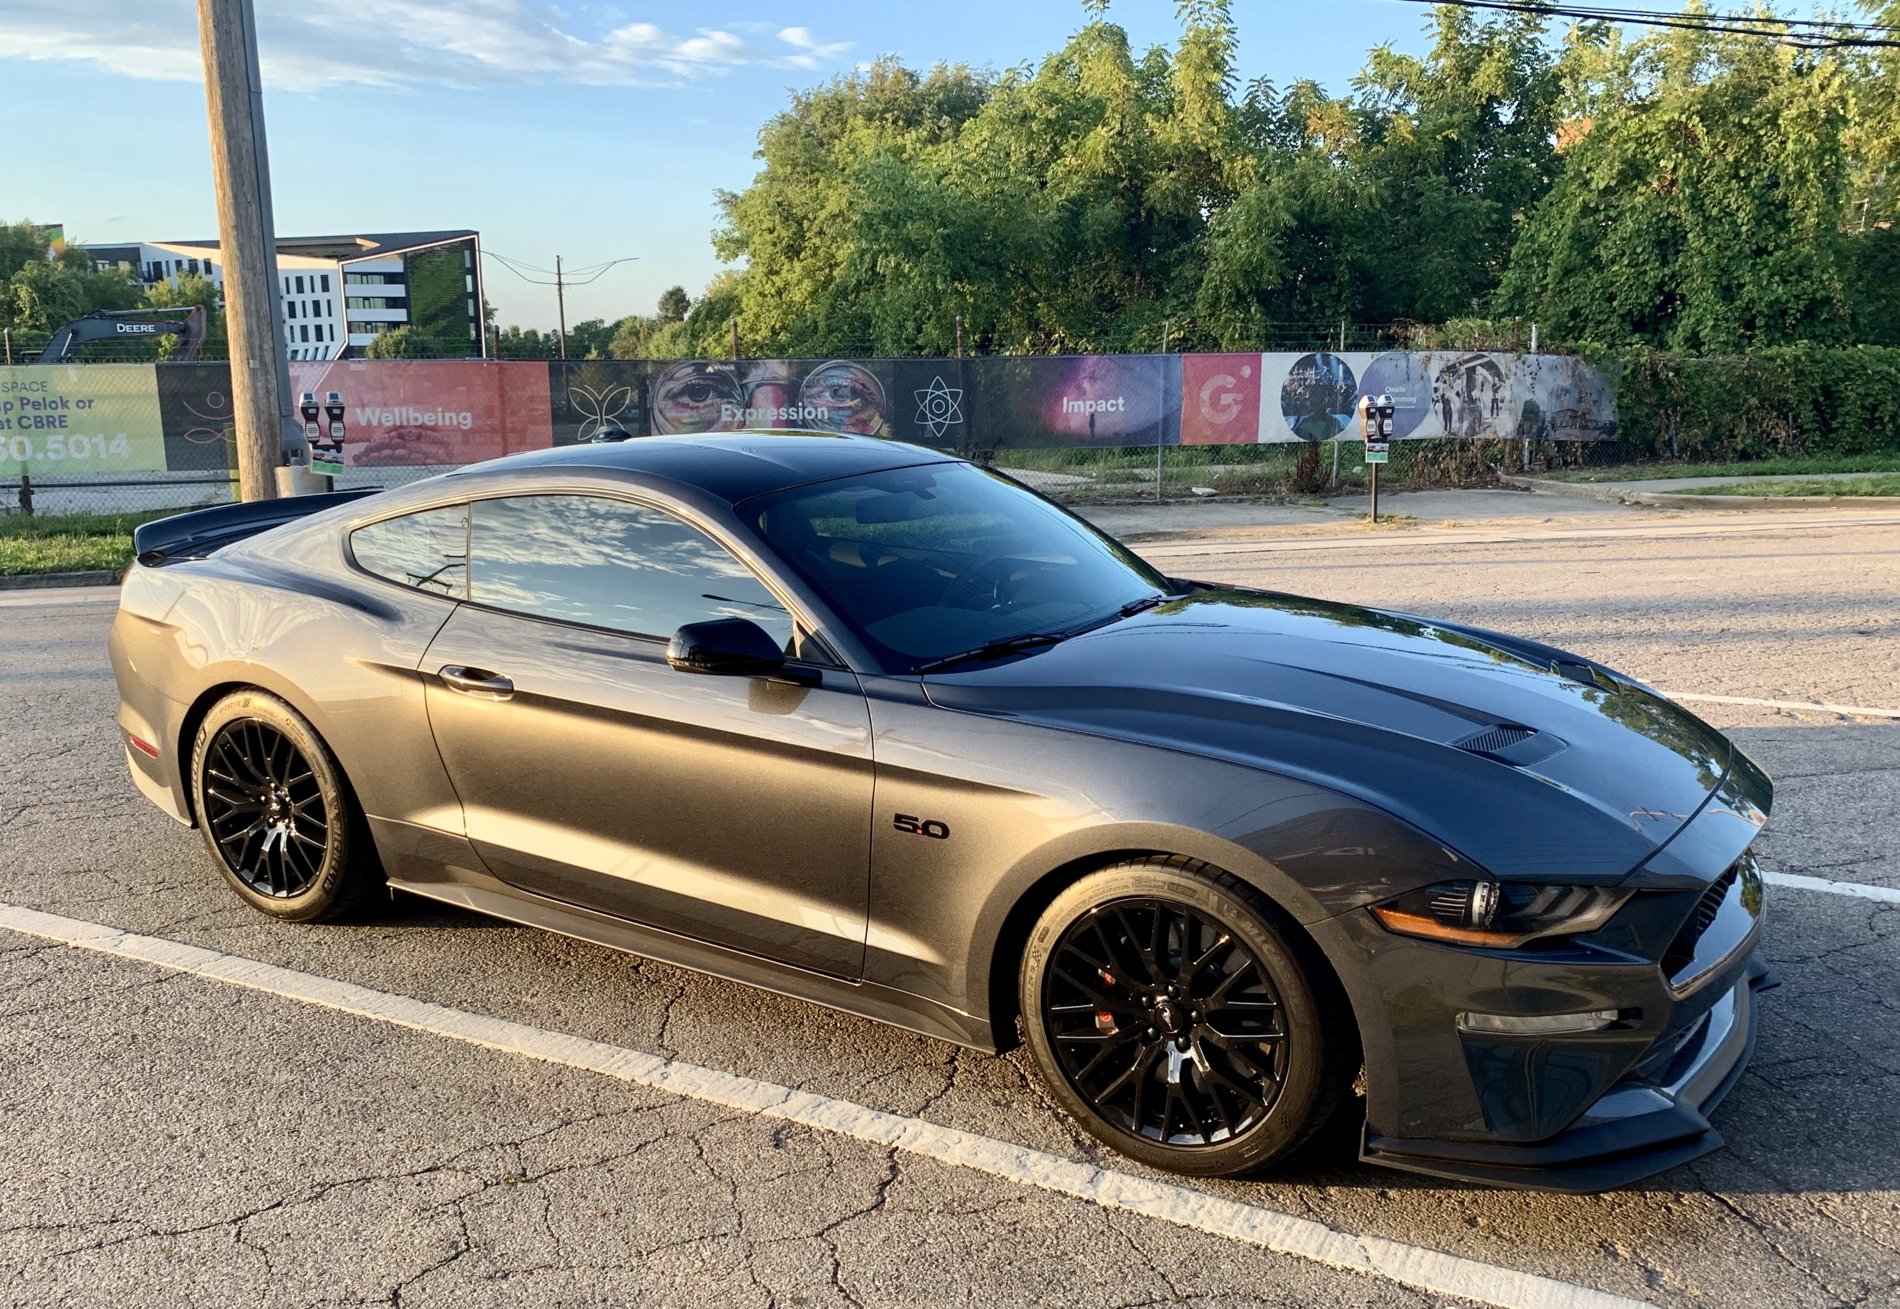 PP1 Wheels, Lowered, What Series Tire’s? | 2015+ S550 Mustang Forum (GT ...